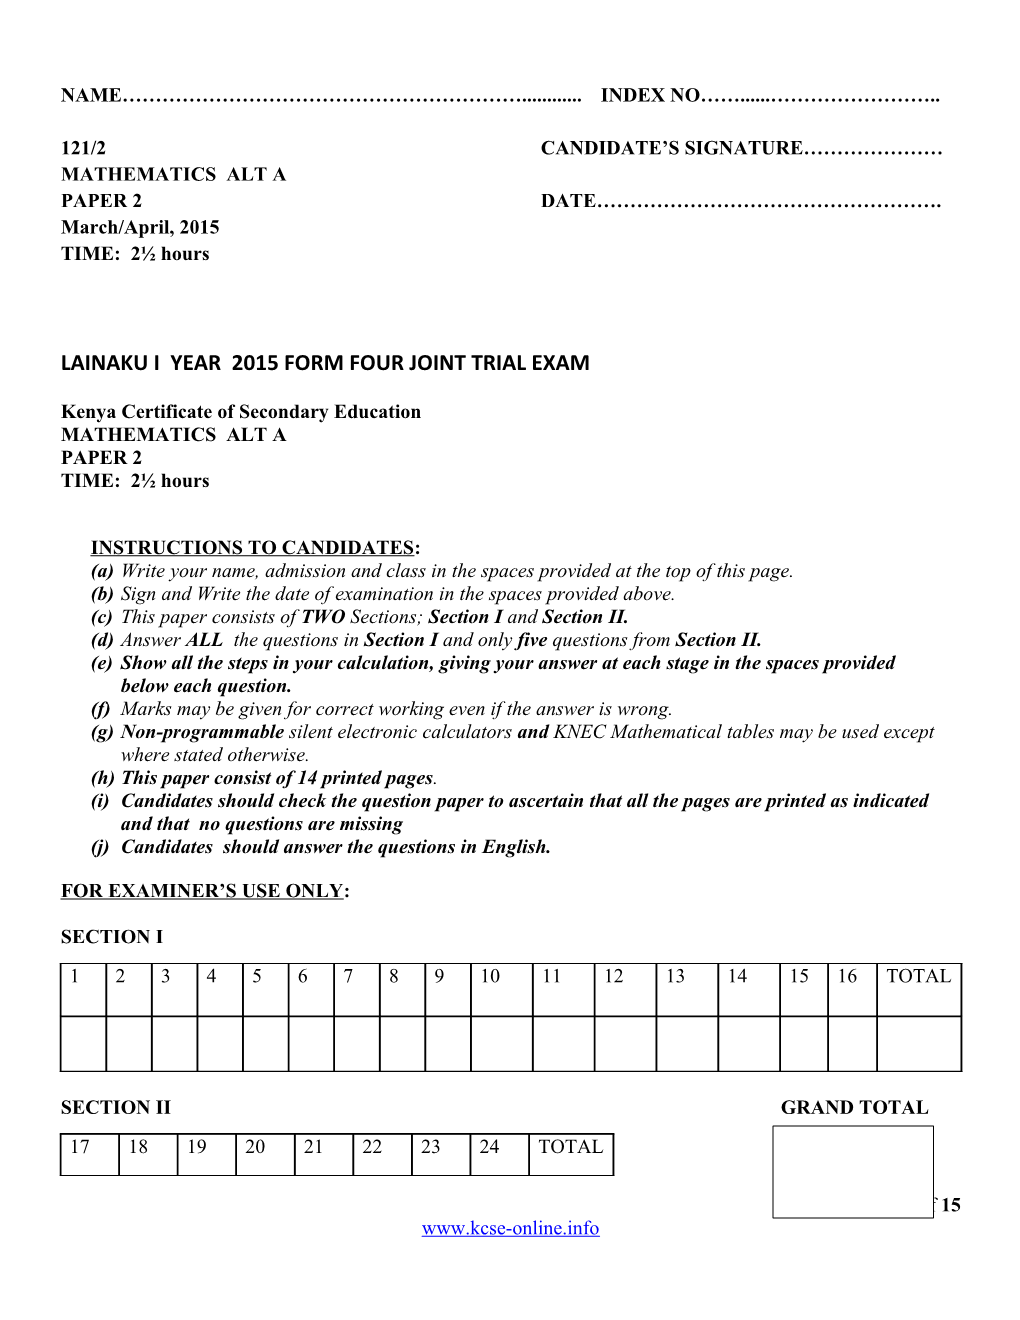 Lainaku I Year 2015 Form Four Joint Trial Exam